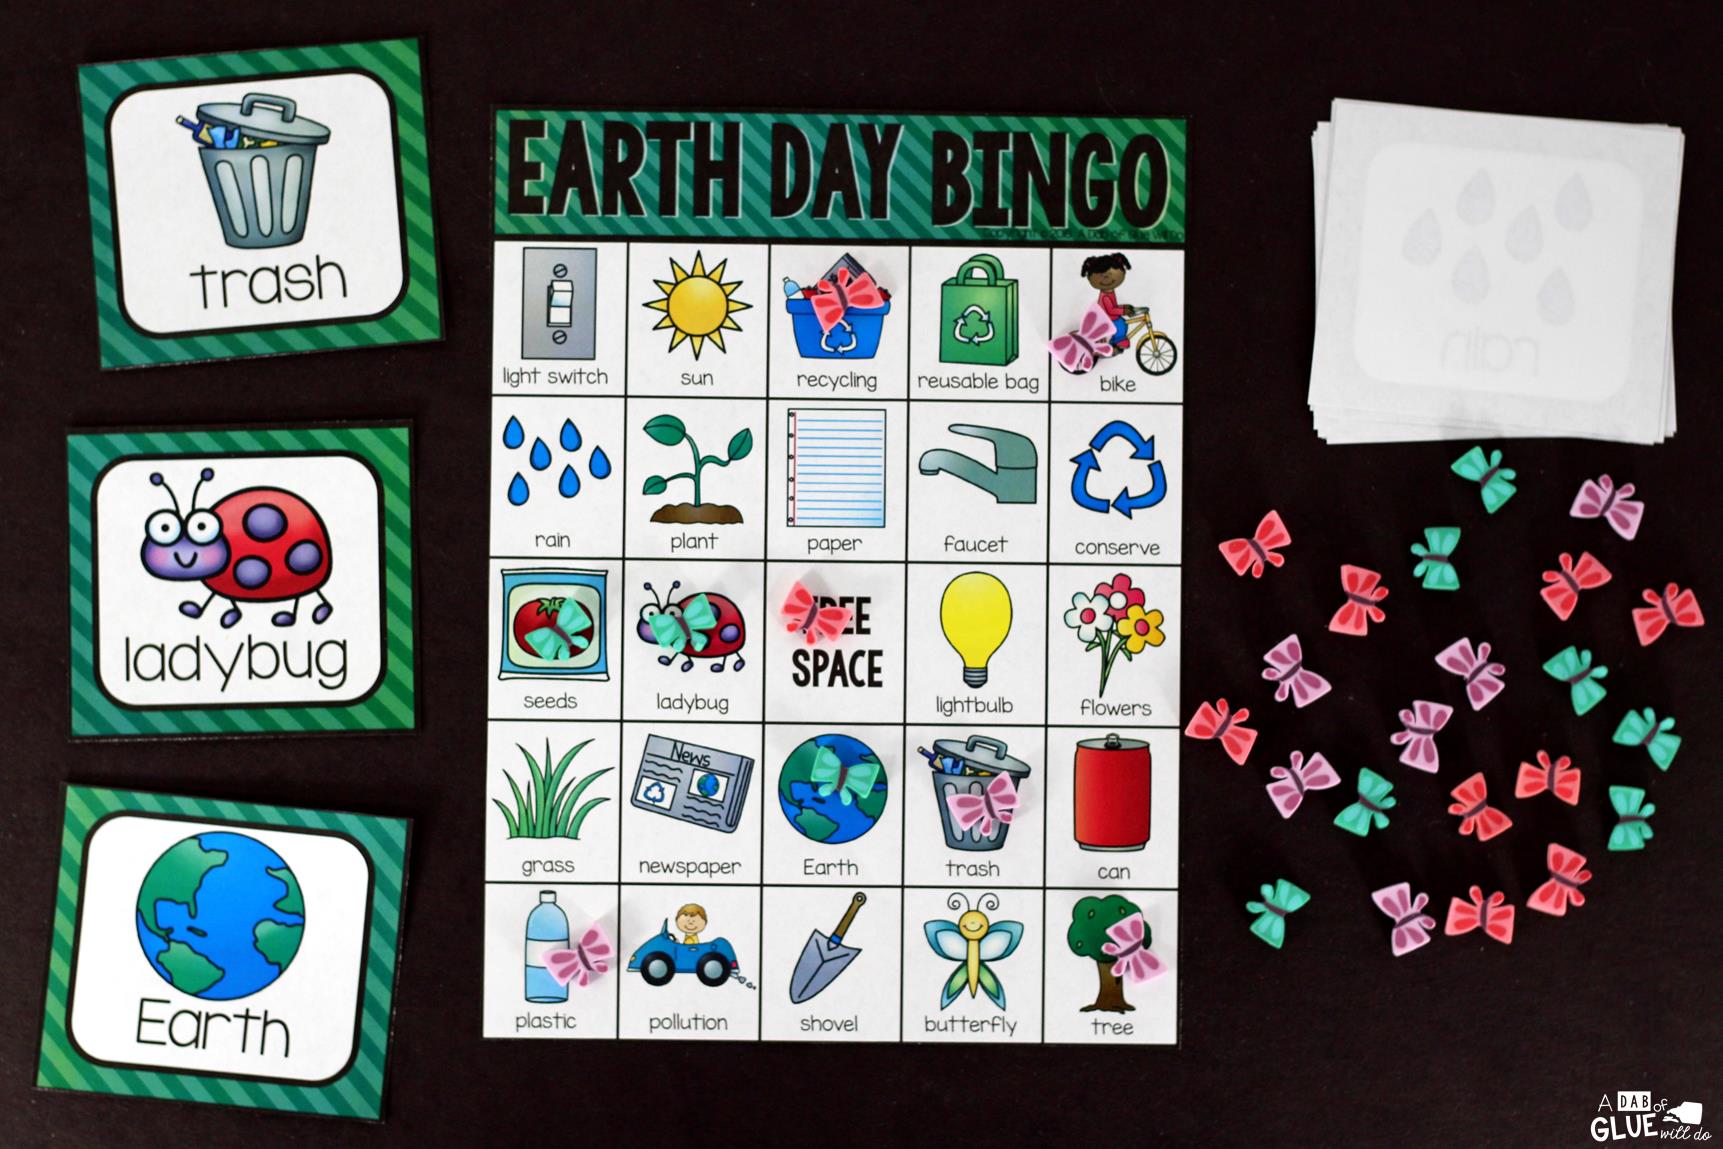 Play Bingo with your elementary age students with these fun Bingo Sheets for Earth Day! Perfect for large groups in your classroom or small review groups. Add this to your spring party with 30 unique Earth Day Bingo boards or any celebration with your students! Teaching cards are also included in this fun game for young children! Black and white options available to save your color ink.